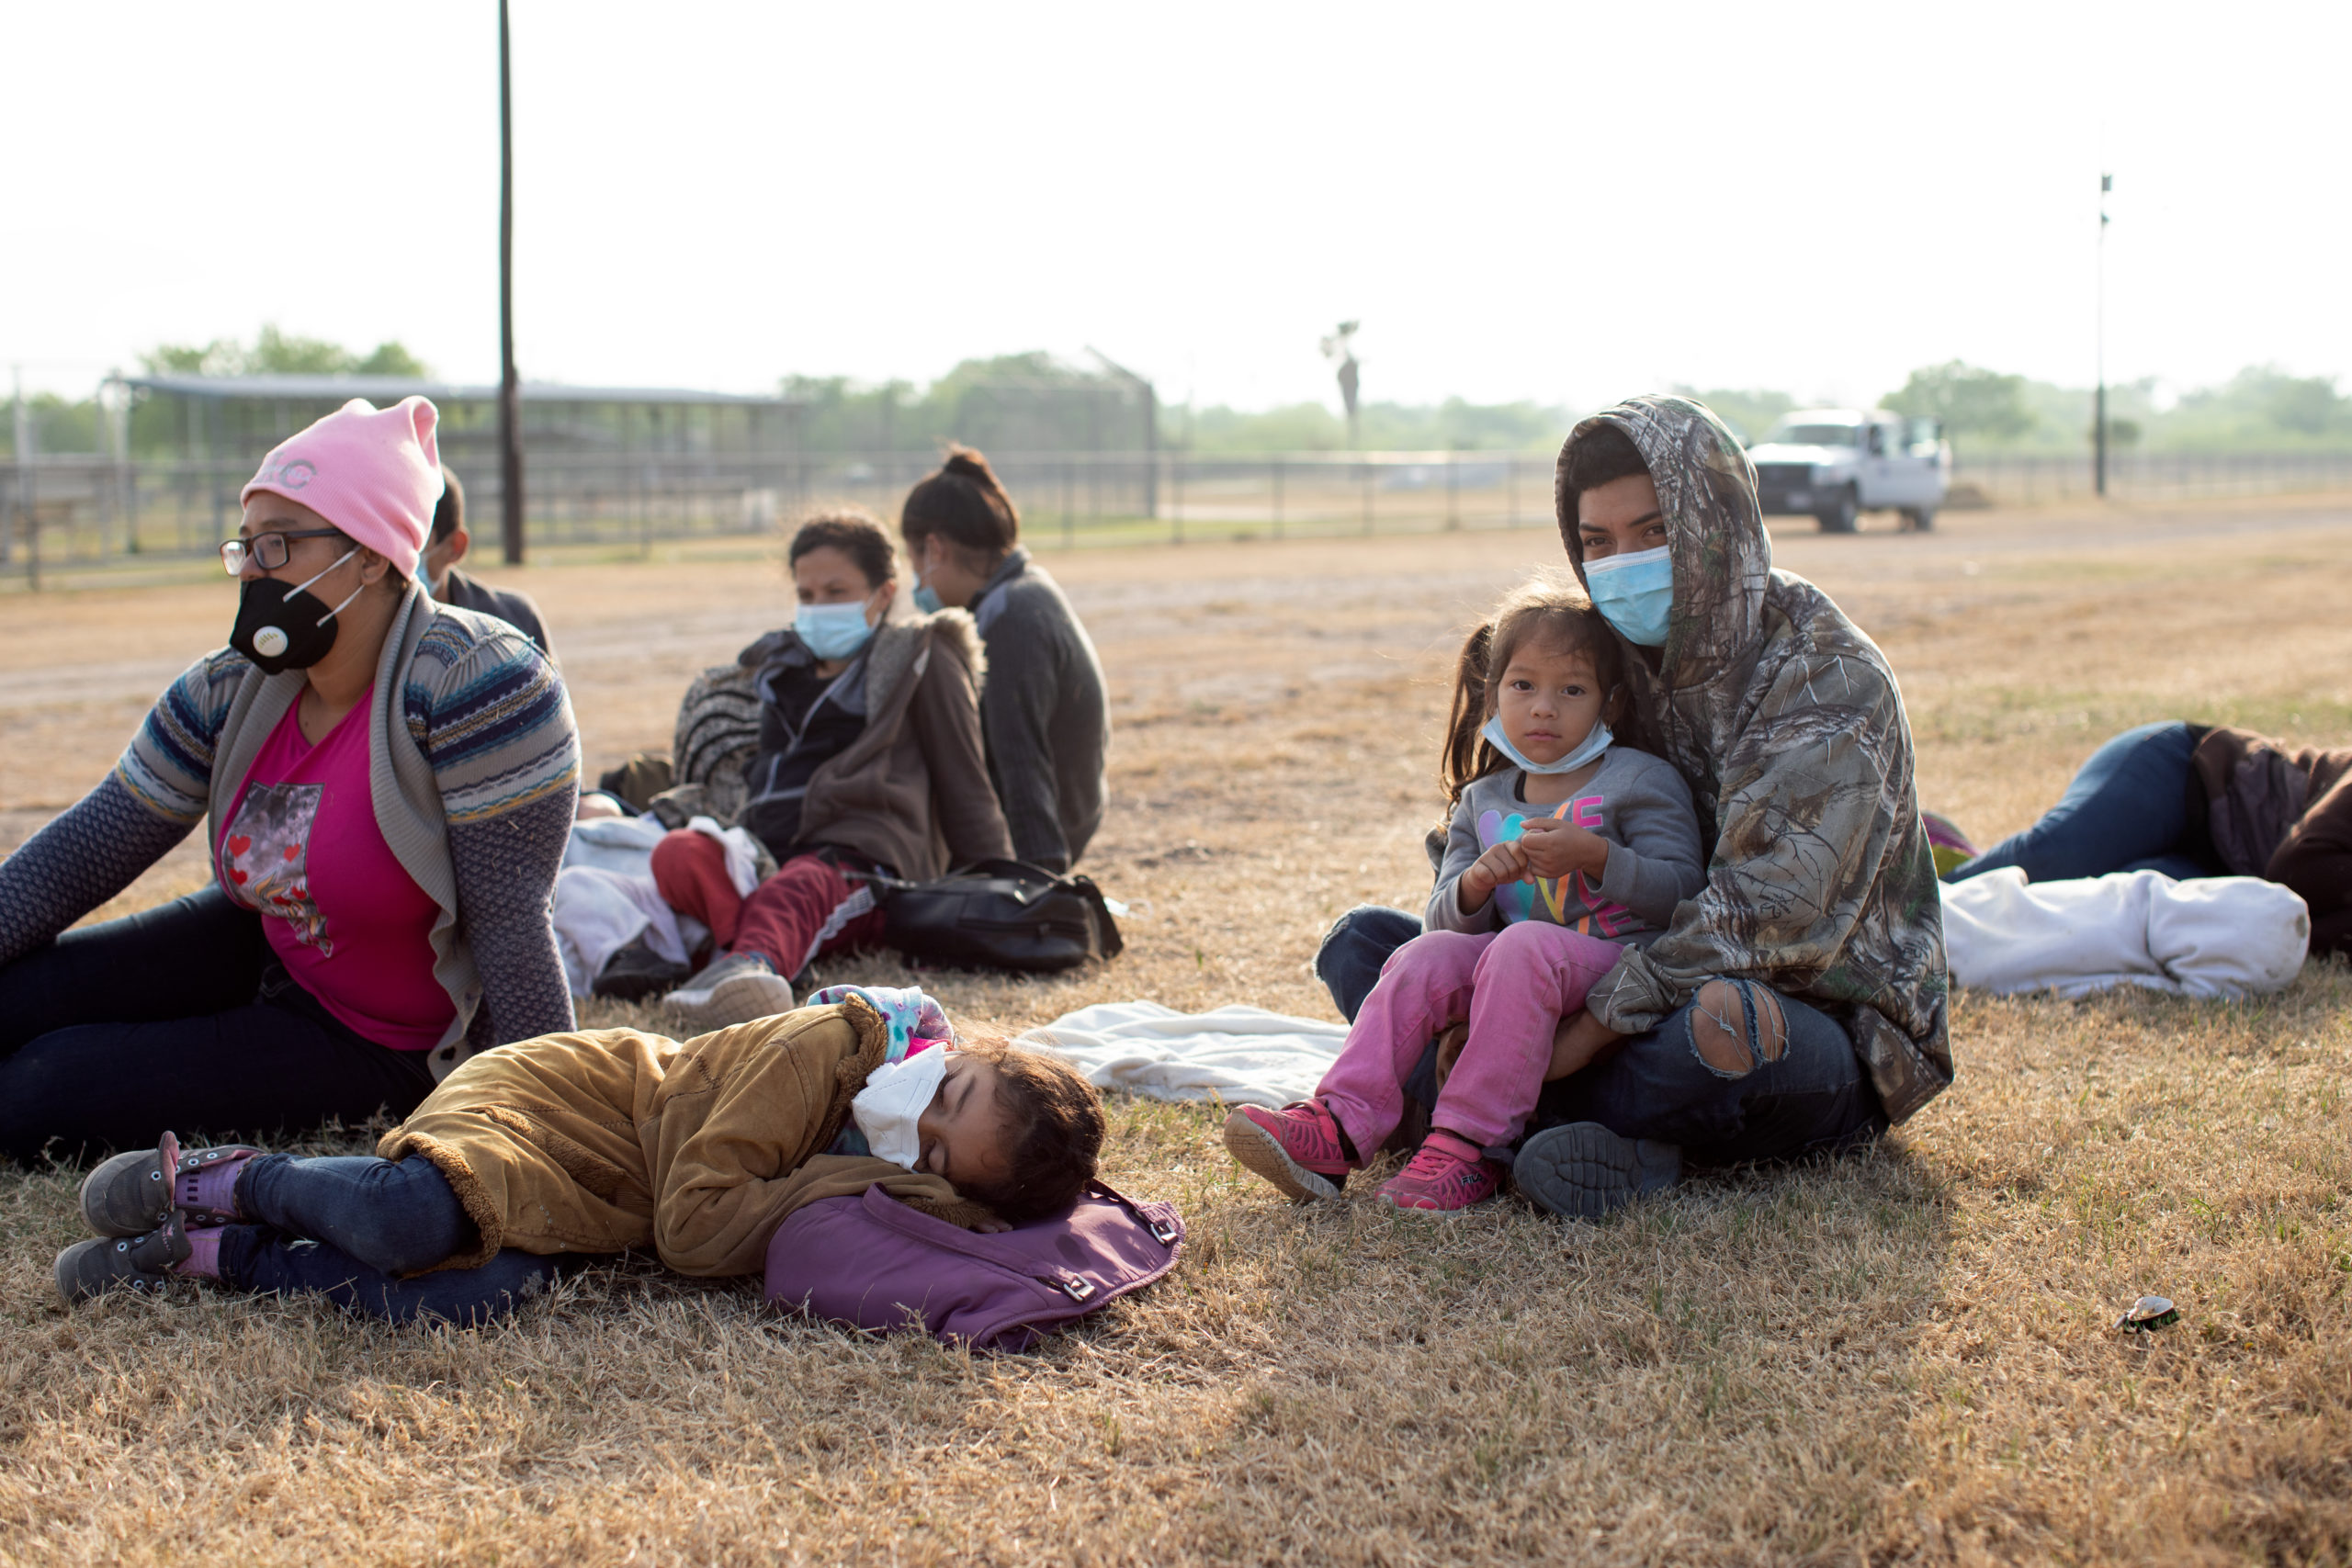 Several illegal migrants slept on the grass near the side of a public road as Customs and Border Protection officials worked to process the groups in La Joya, Texas on March 27, 2021. (Kaylee Greenlee - Daily Caller News Foundation) 